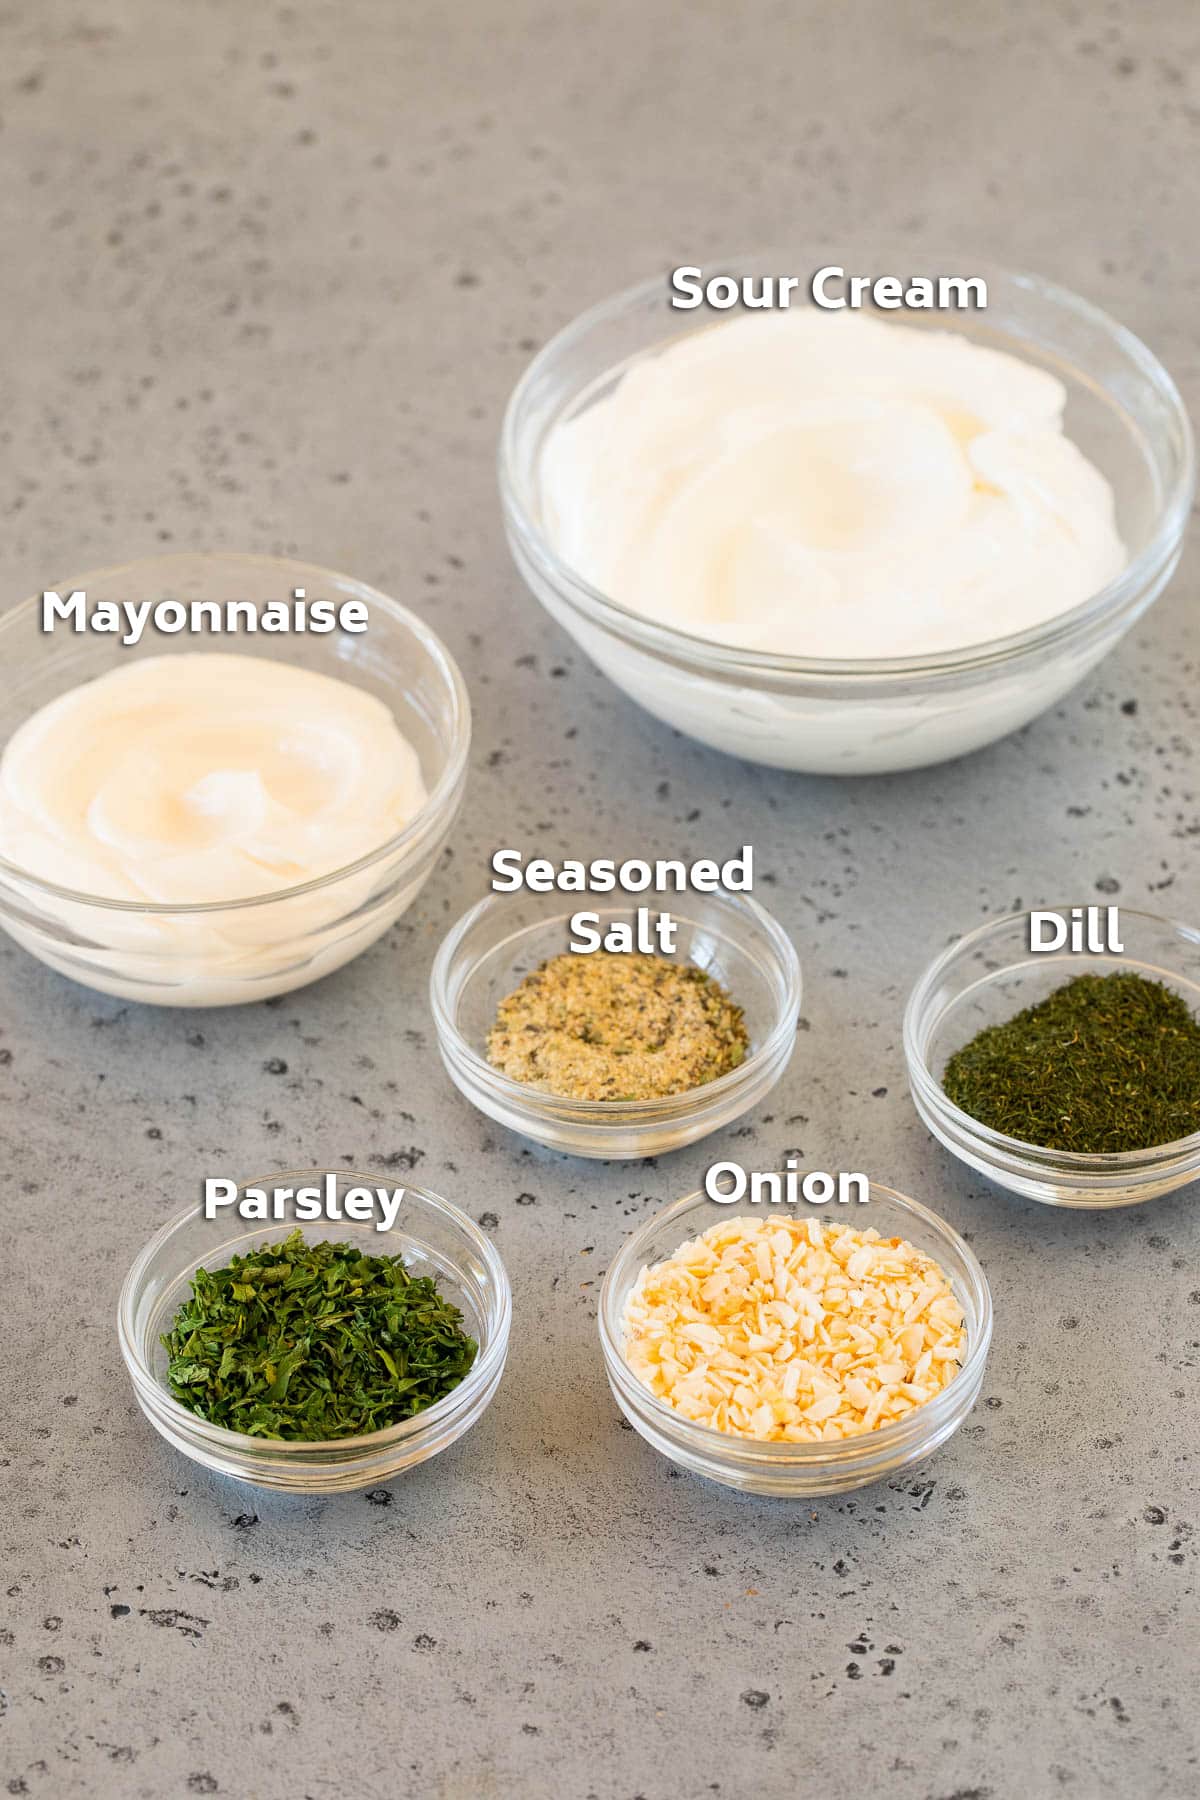 Bowls of ingredients including sour cream, mayonnaise and dried herbs and spices.